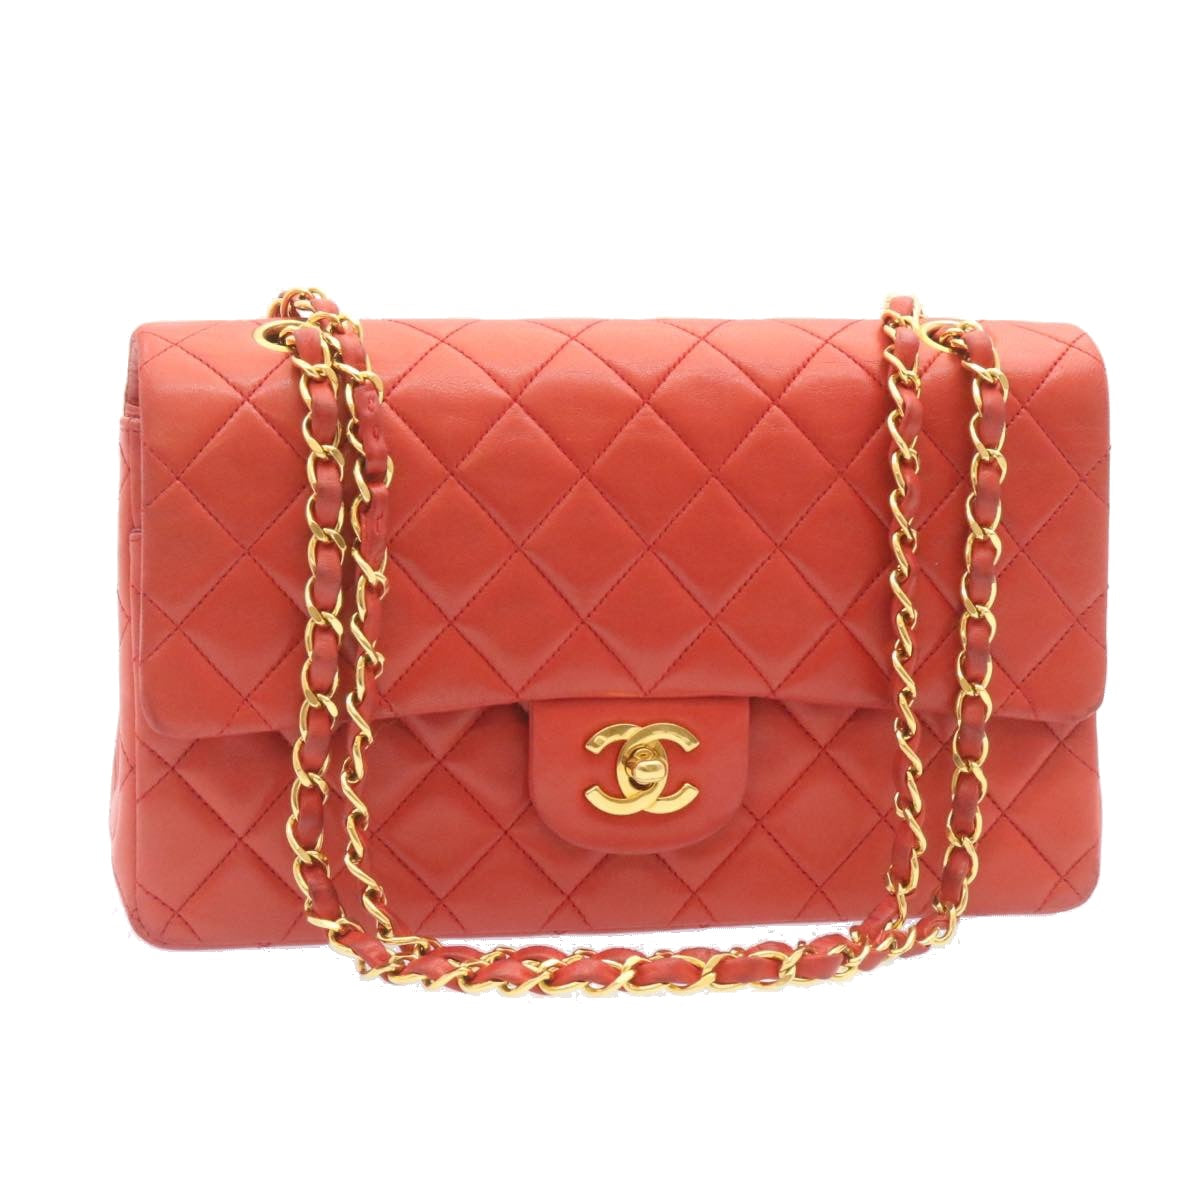 CHANEL Matelasse 25 Double Chain Flap Shoulder Bag Lamb Skin Red Auth 27897A